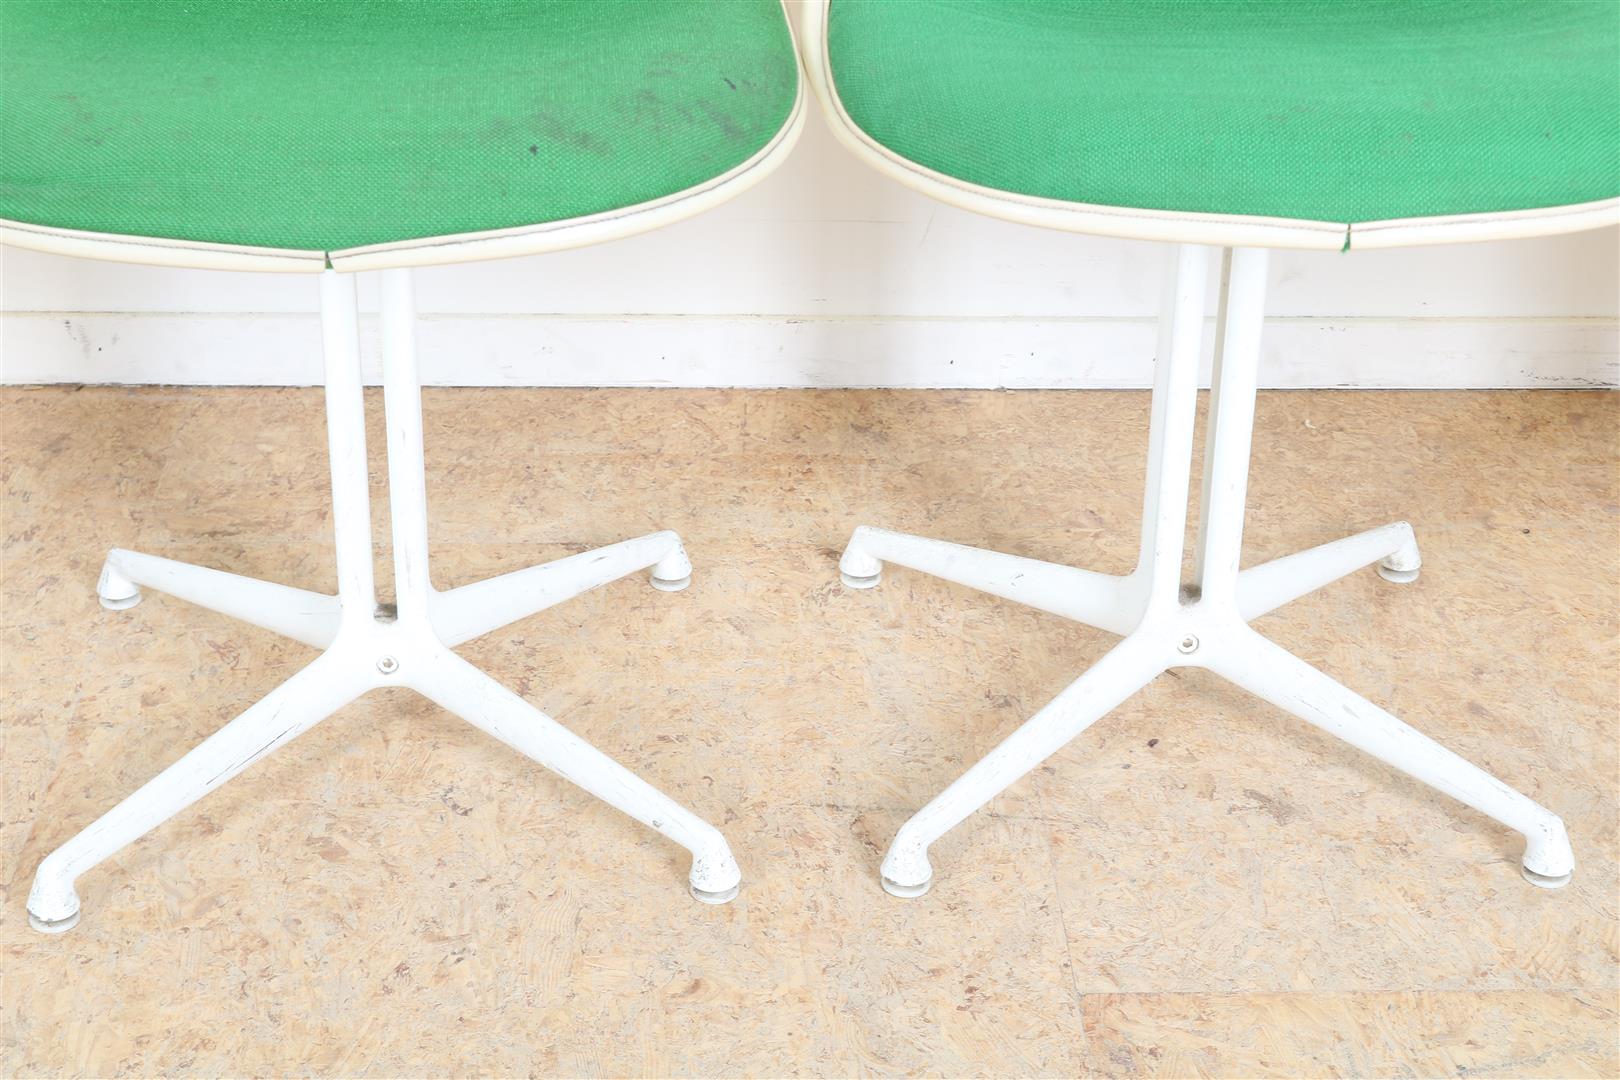 Series of 4 fiberglass design chairs with green upholstery on metal legs, designed by Charels - Image 3 of 4